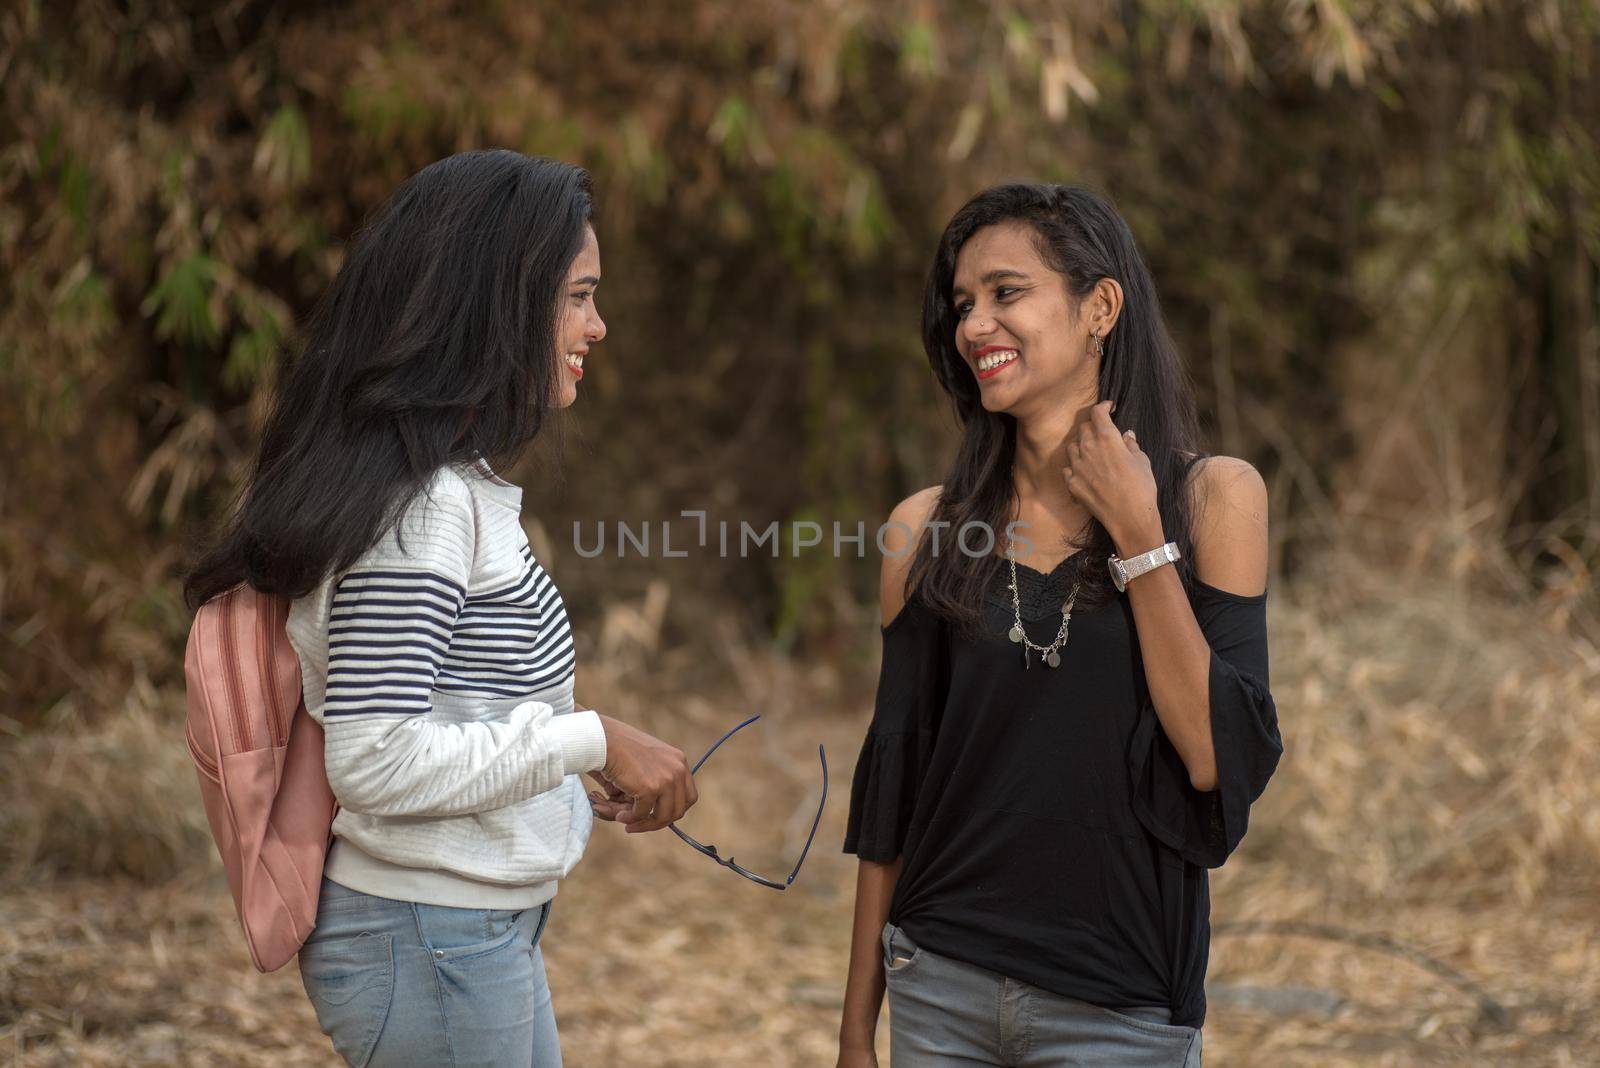 Two young girl friends standing together and having fun in outdoors. Looking at camera.